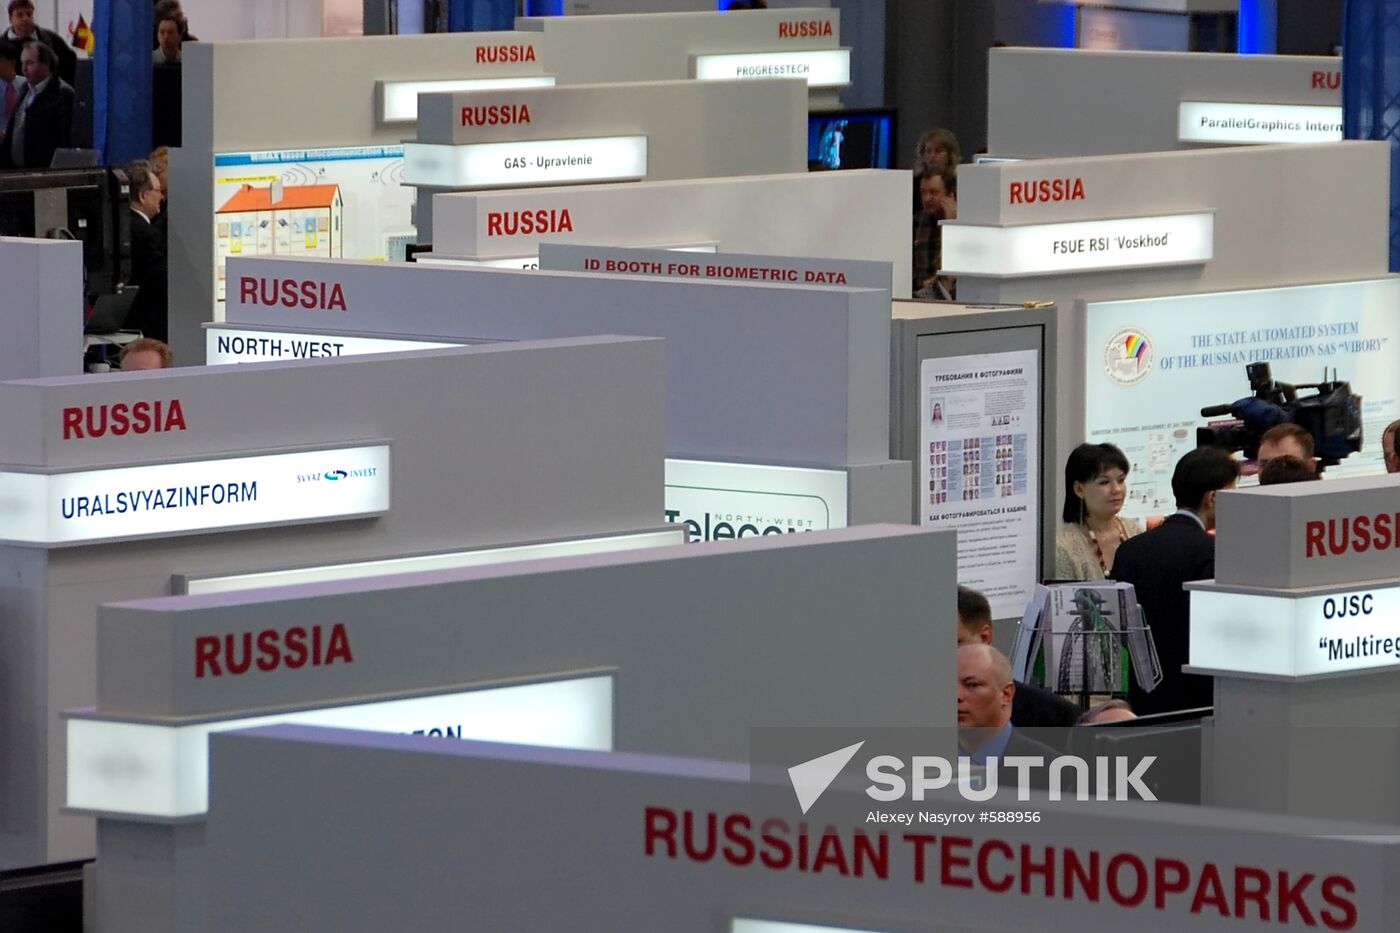 Russian stands at CeBIT fair in Hannover